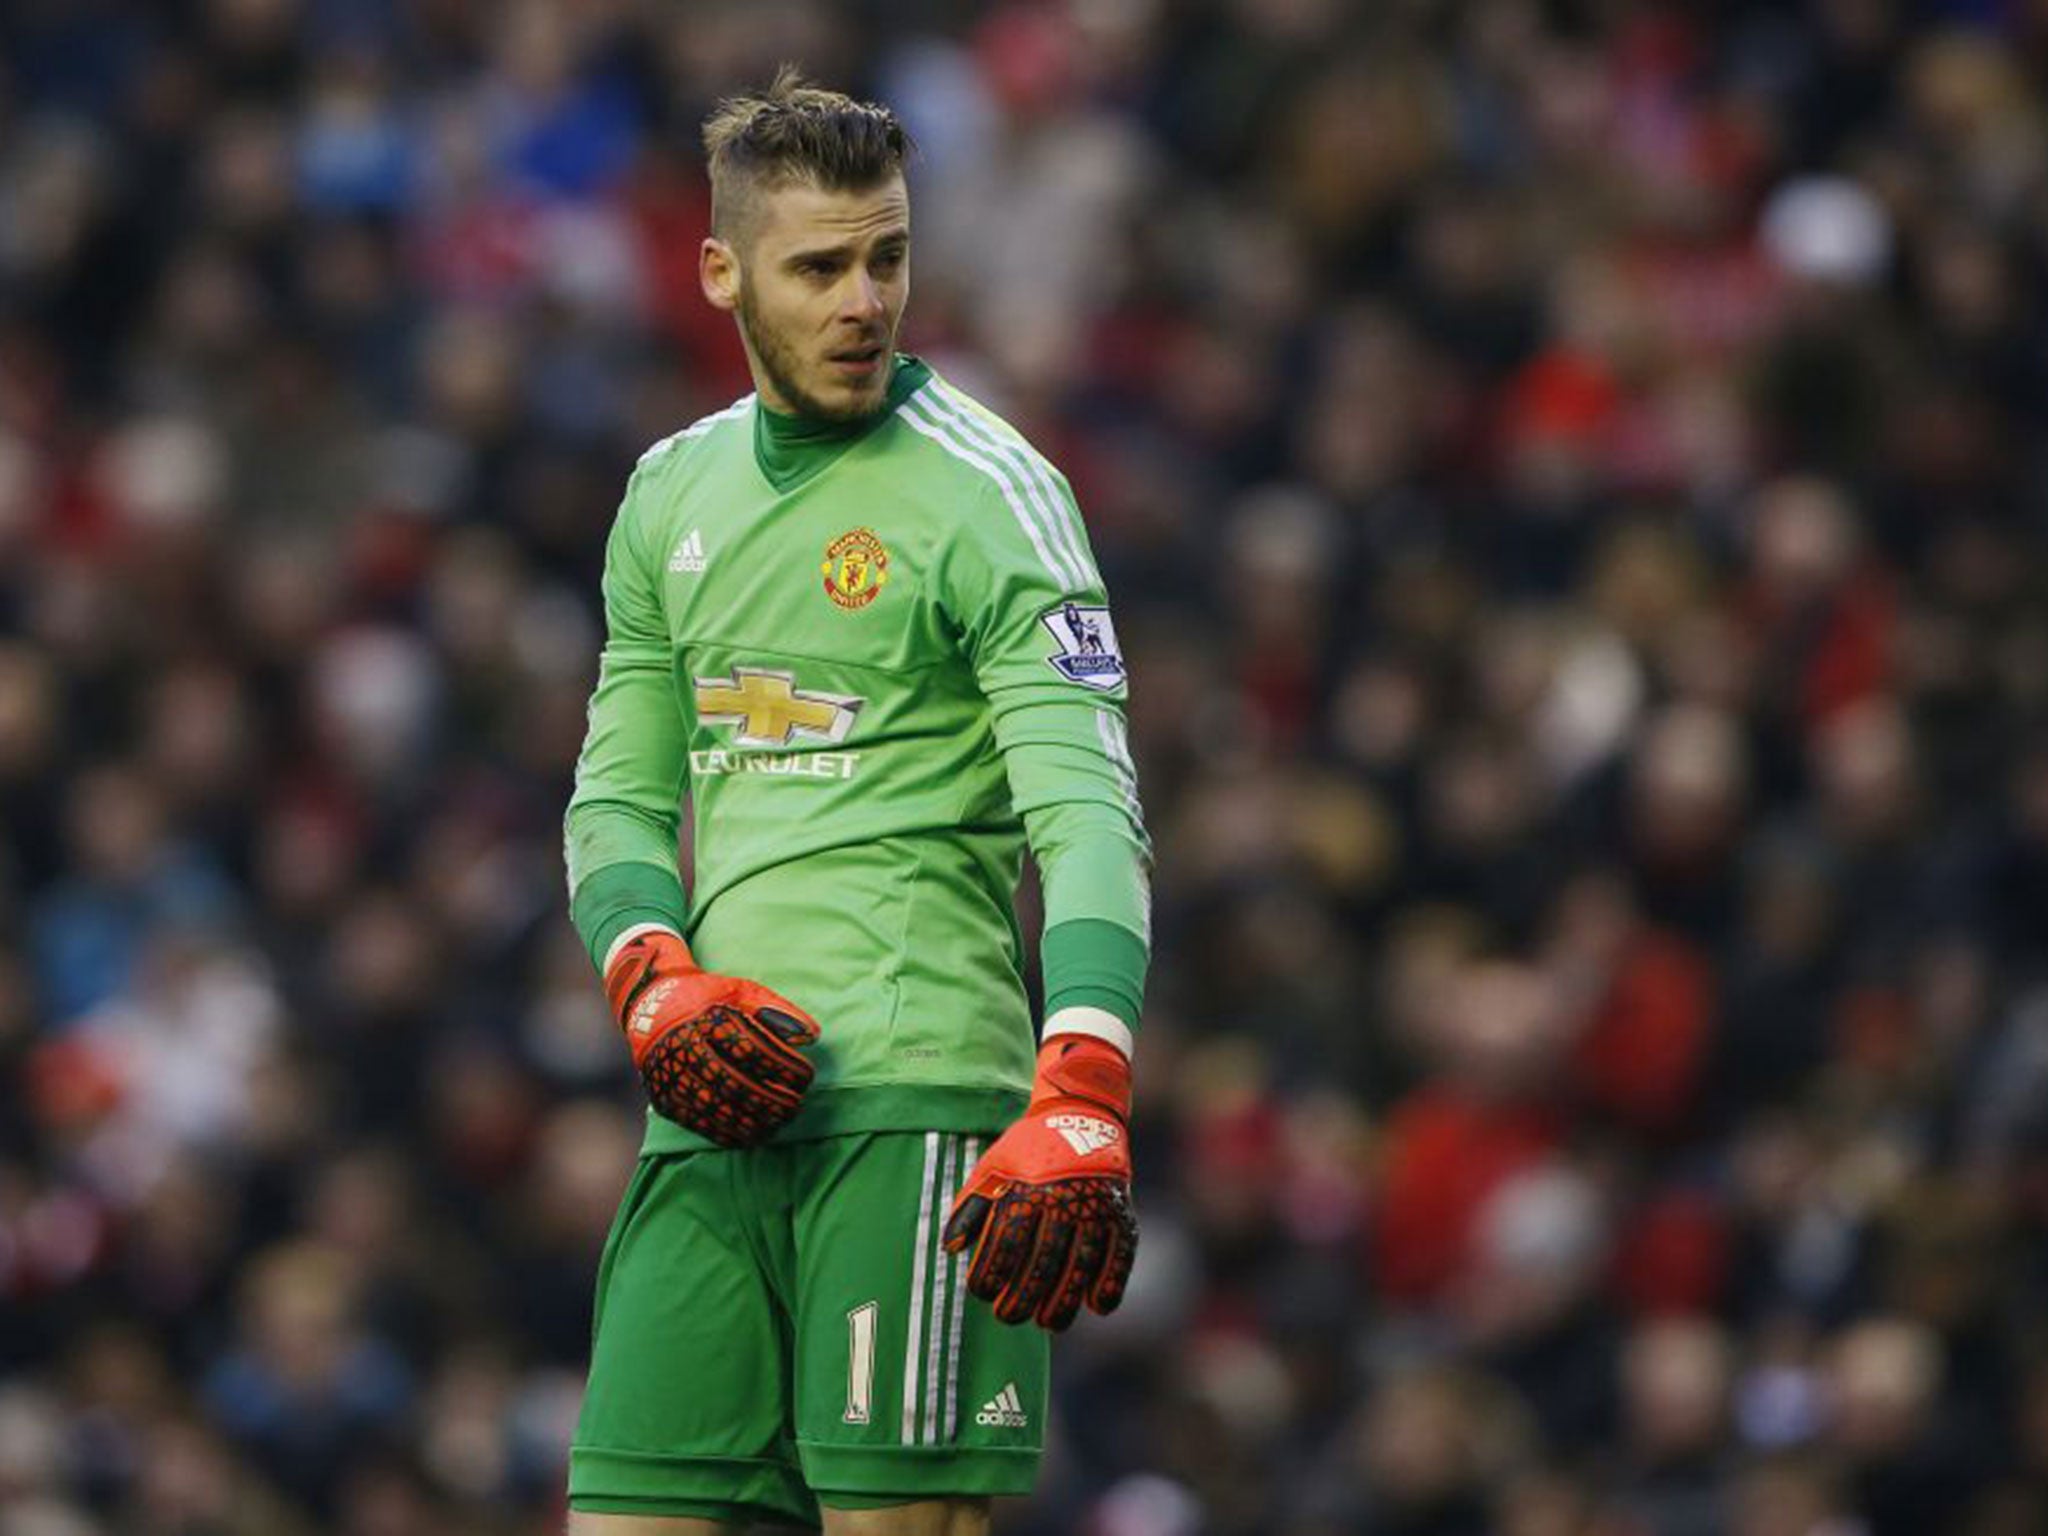 David De Gea came close to joining Real in August